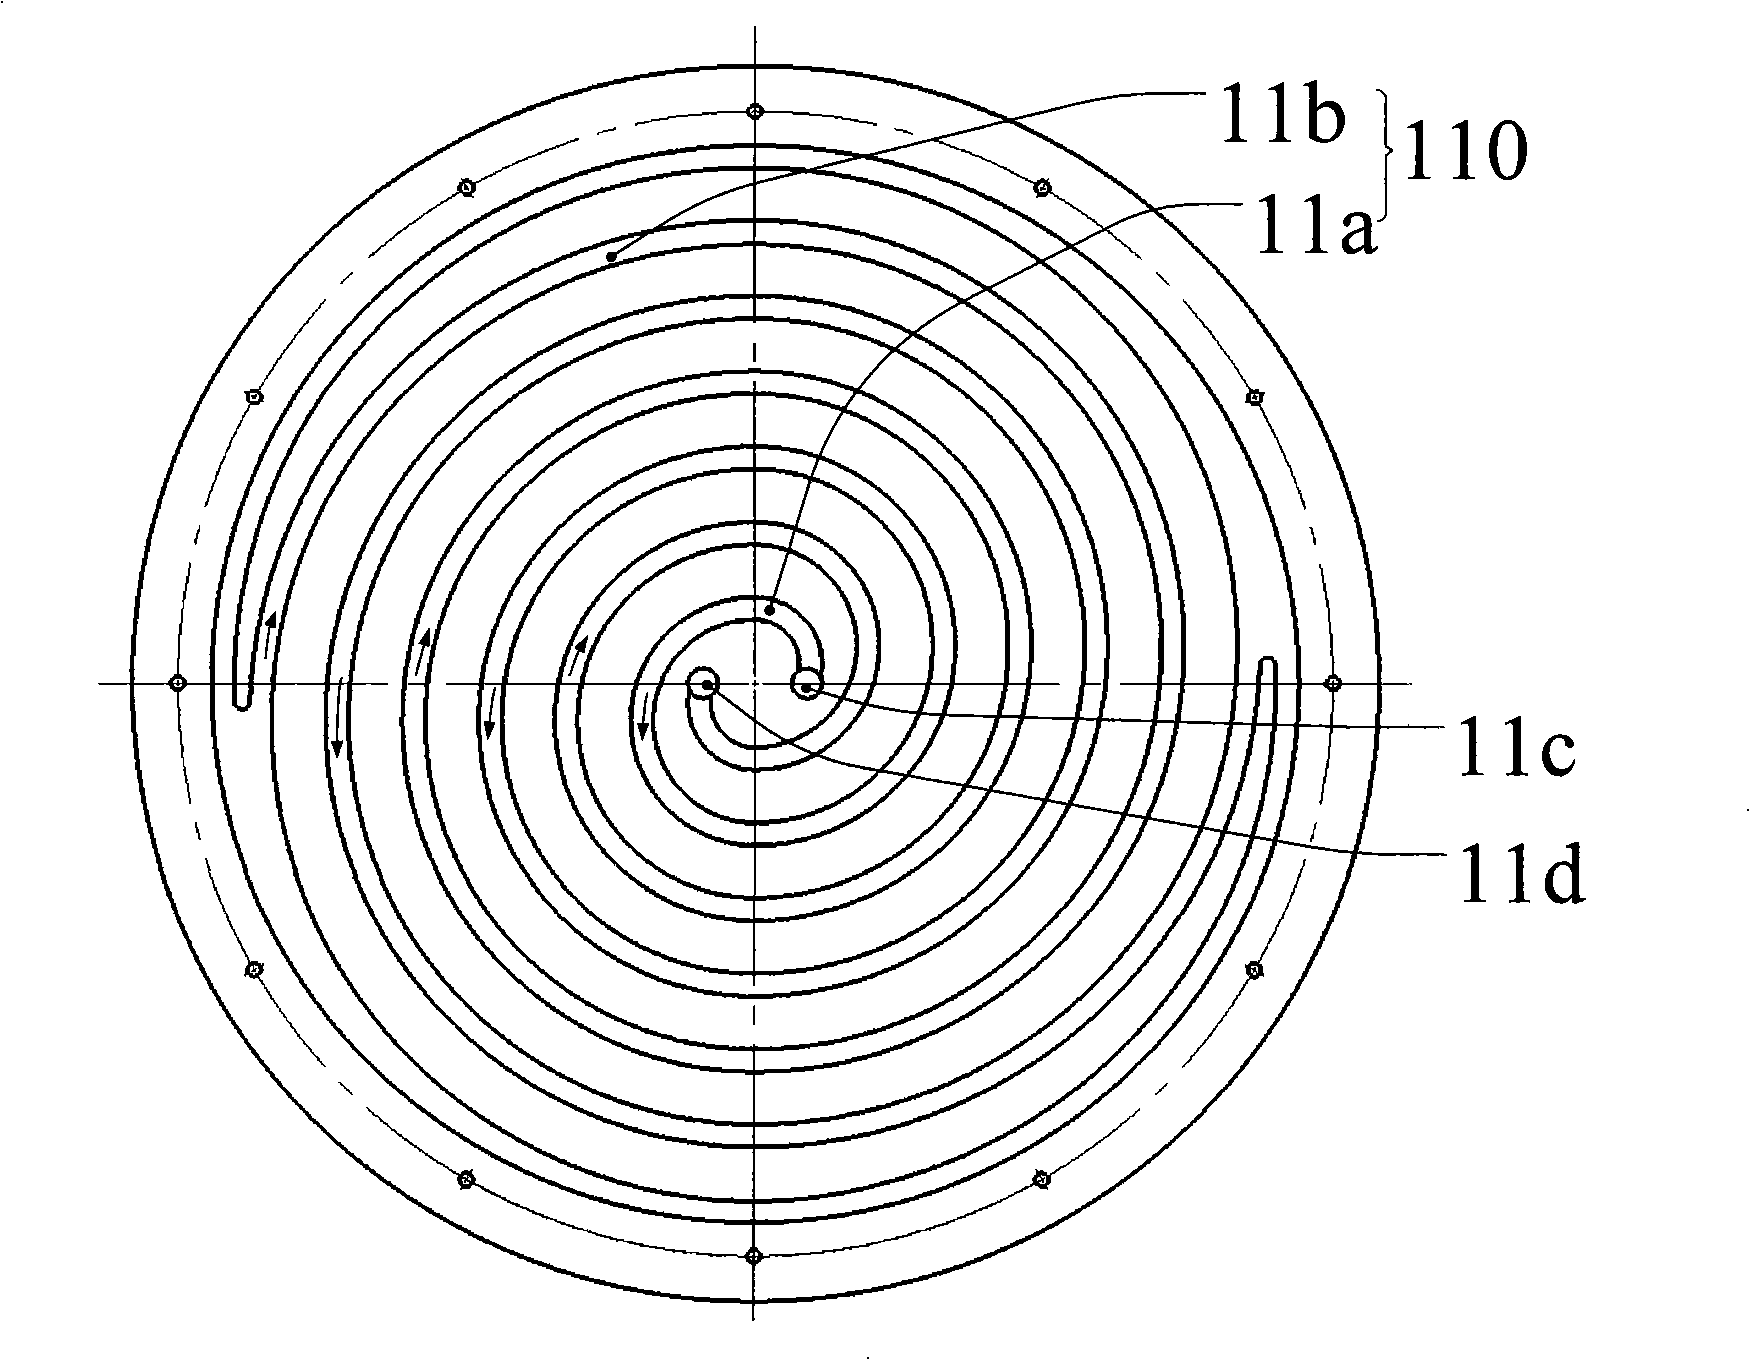 A polishing disk with internal circulated cooling